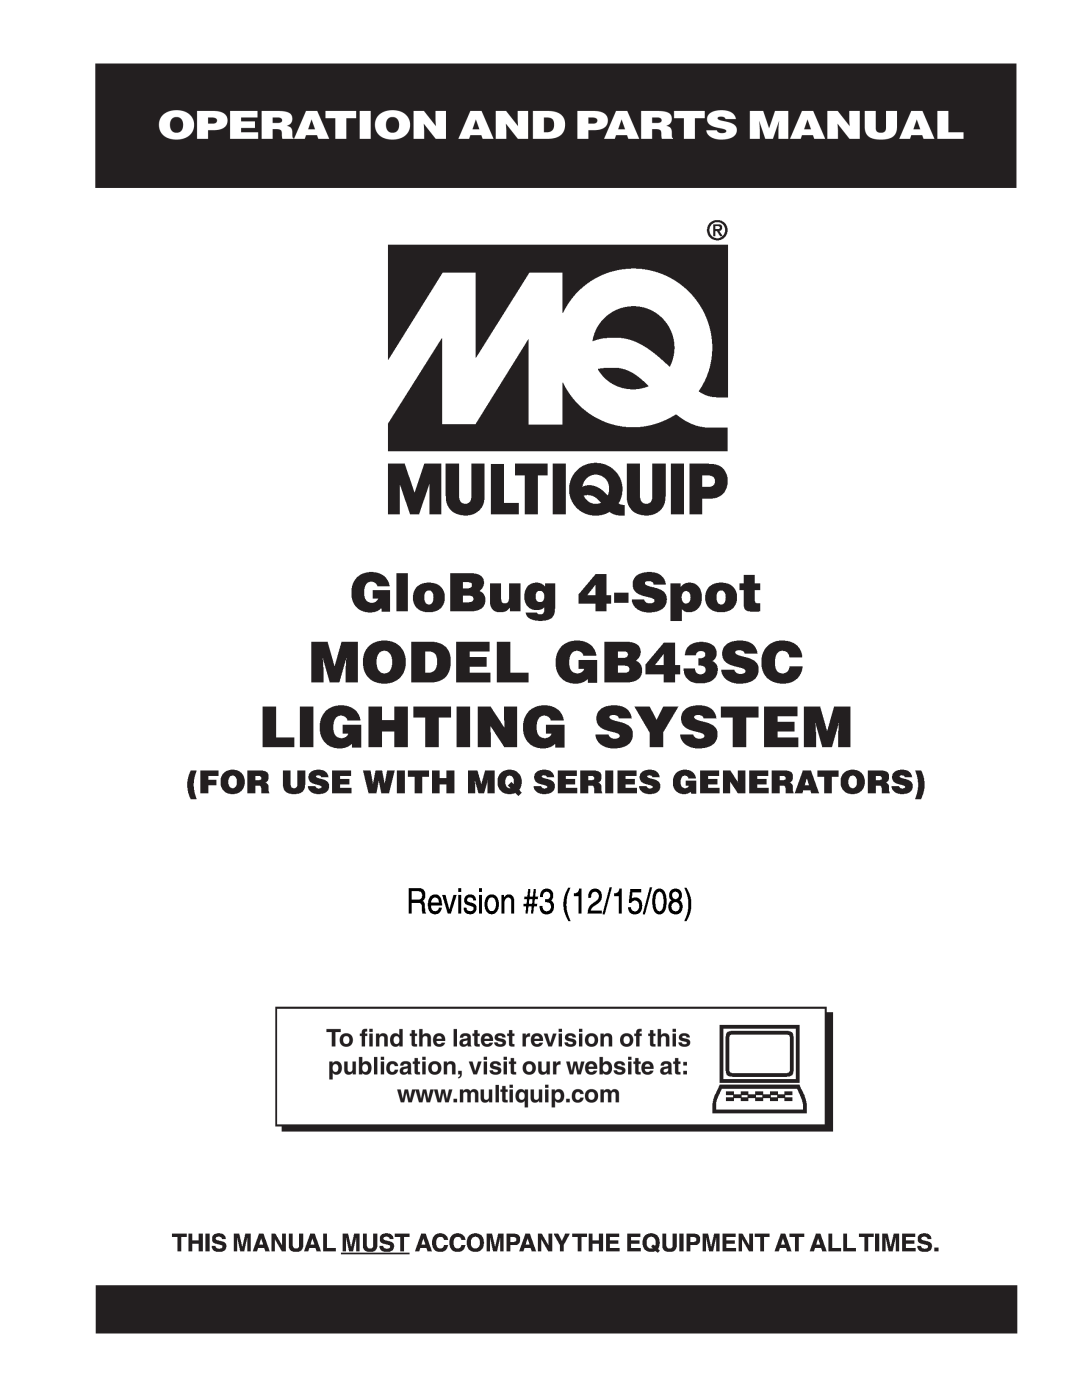 Multiquip gb43sc manual Operation And Parts Manual, MODEL GB43SC LIGHTING SYSTEM, GloBug 4-Spot, Revision #3 12/15/08 